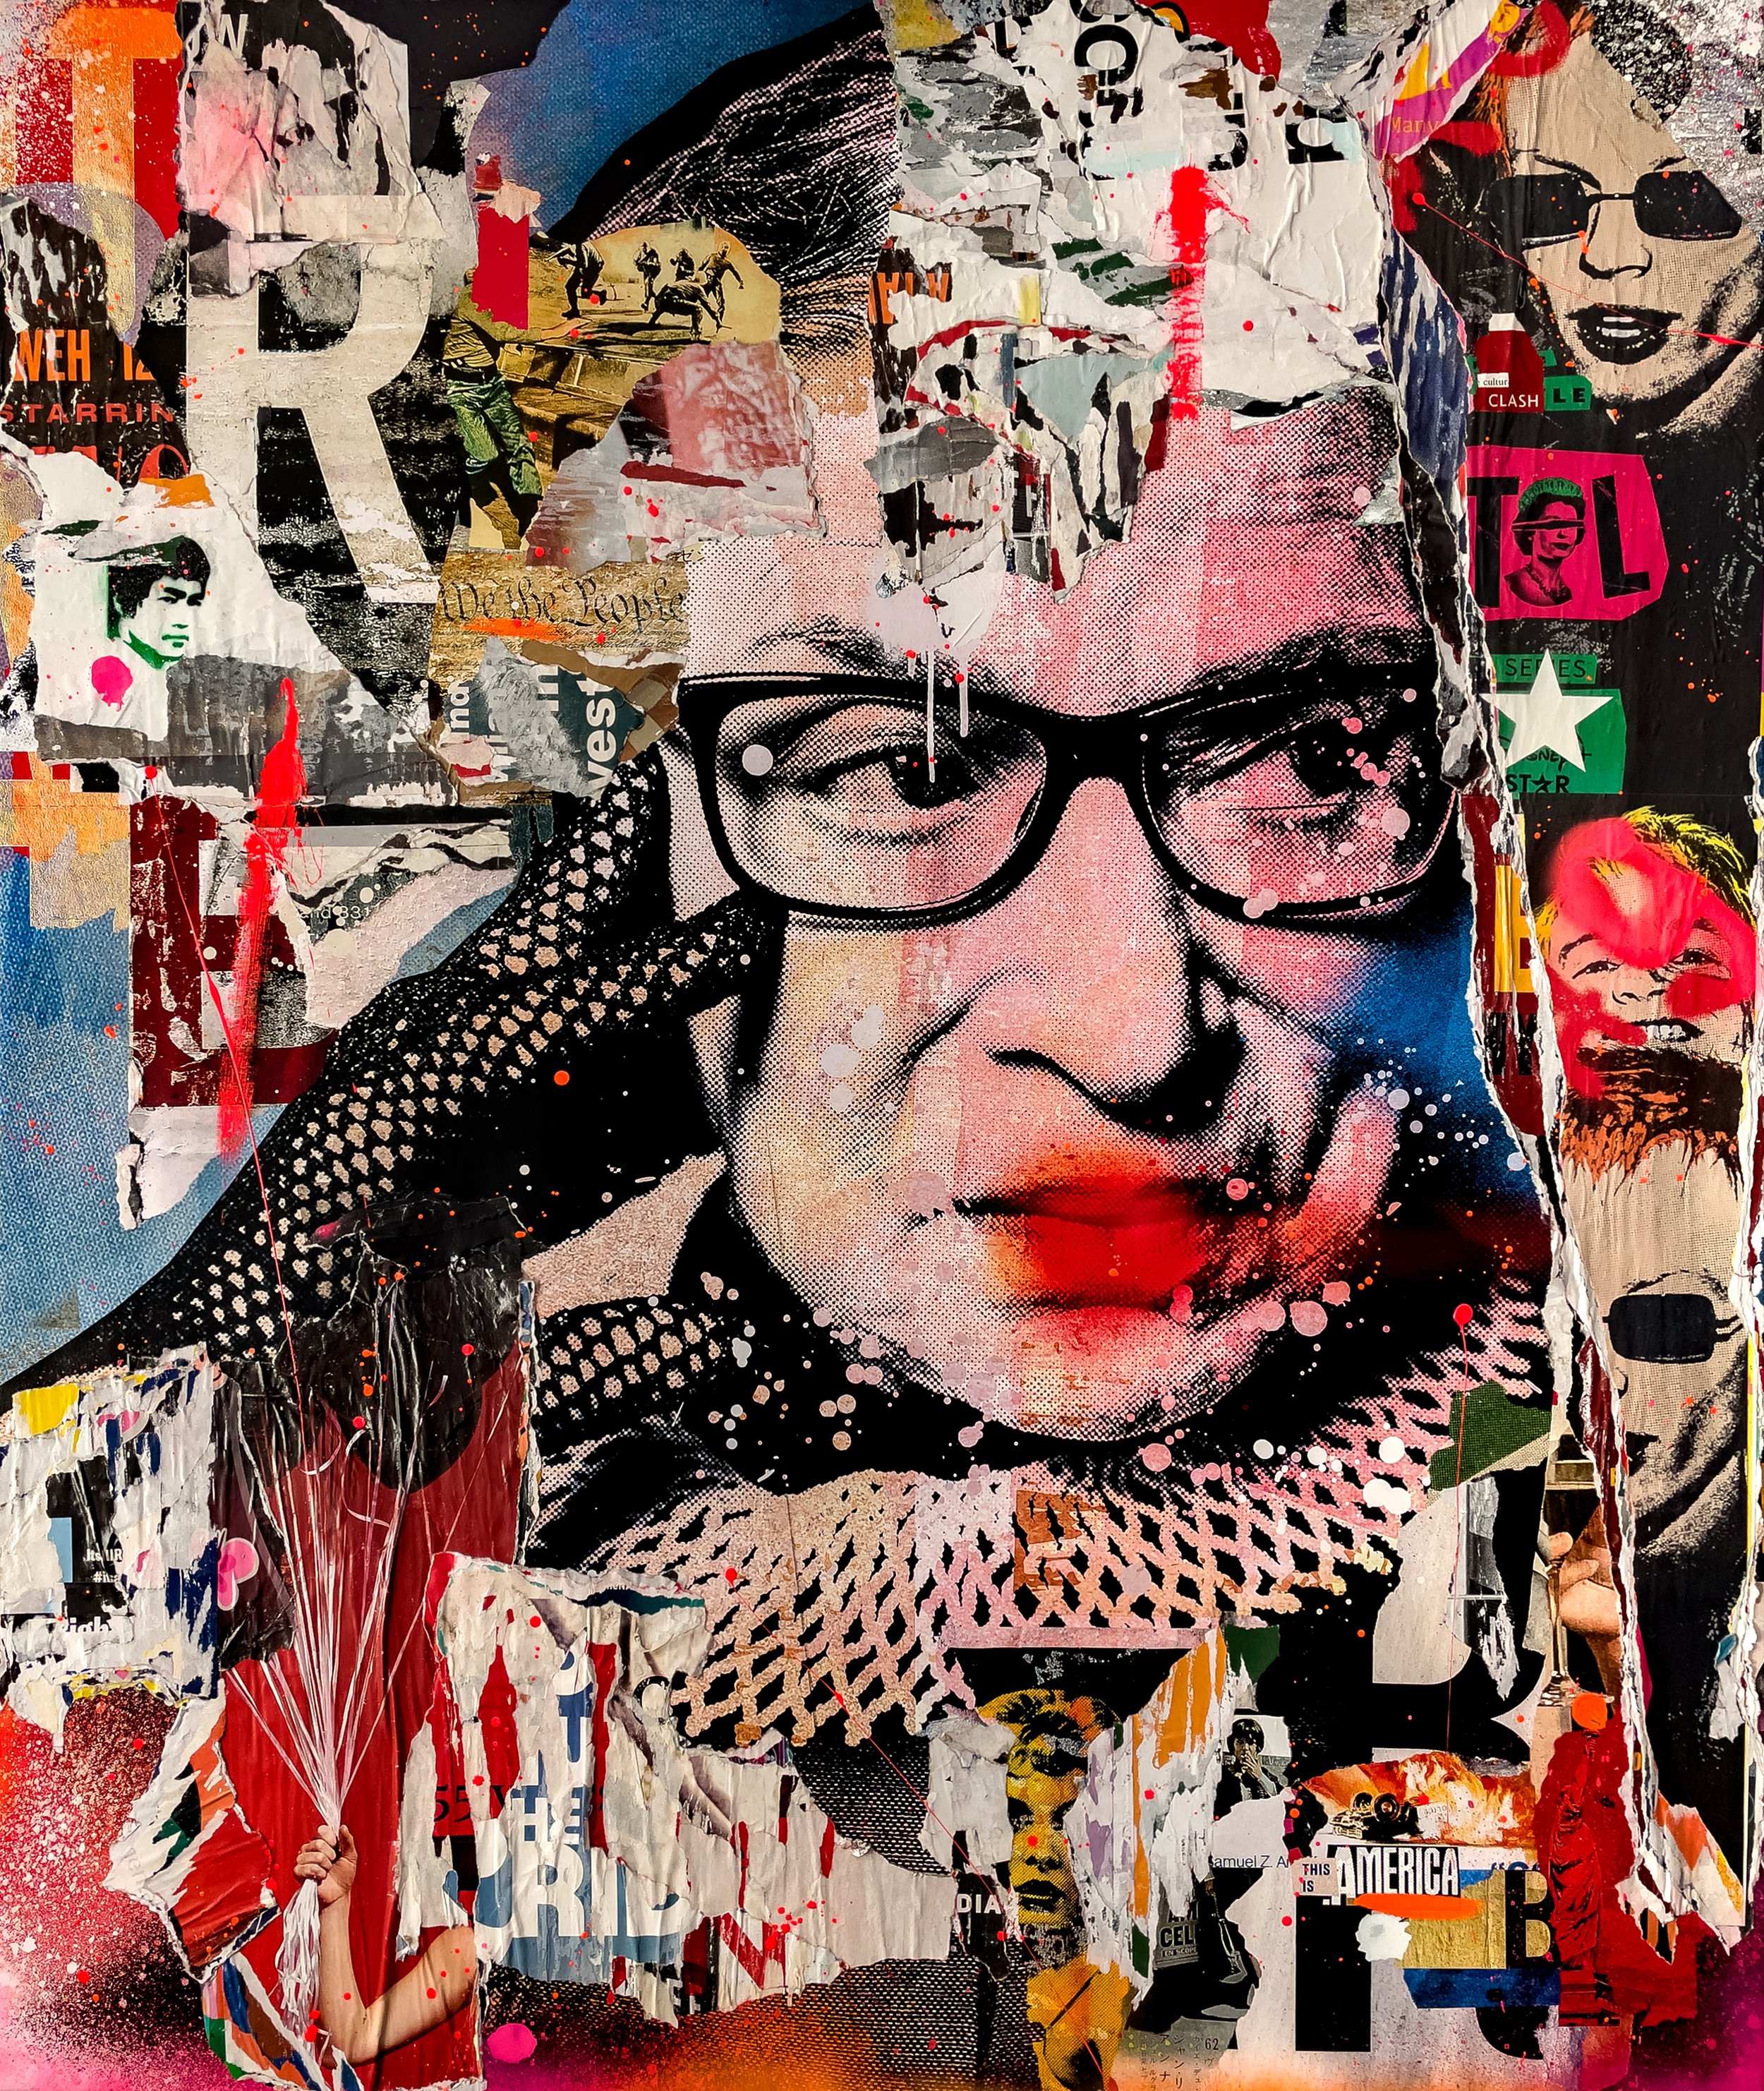 "Ruth Bader Ginsburg" 2022. 60"x50" Pigment, spray &amp; acrylic paint, paper, glue &amp; varnish on canvas